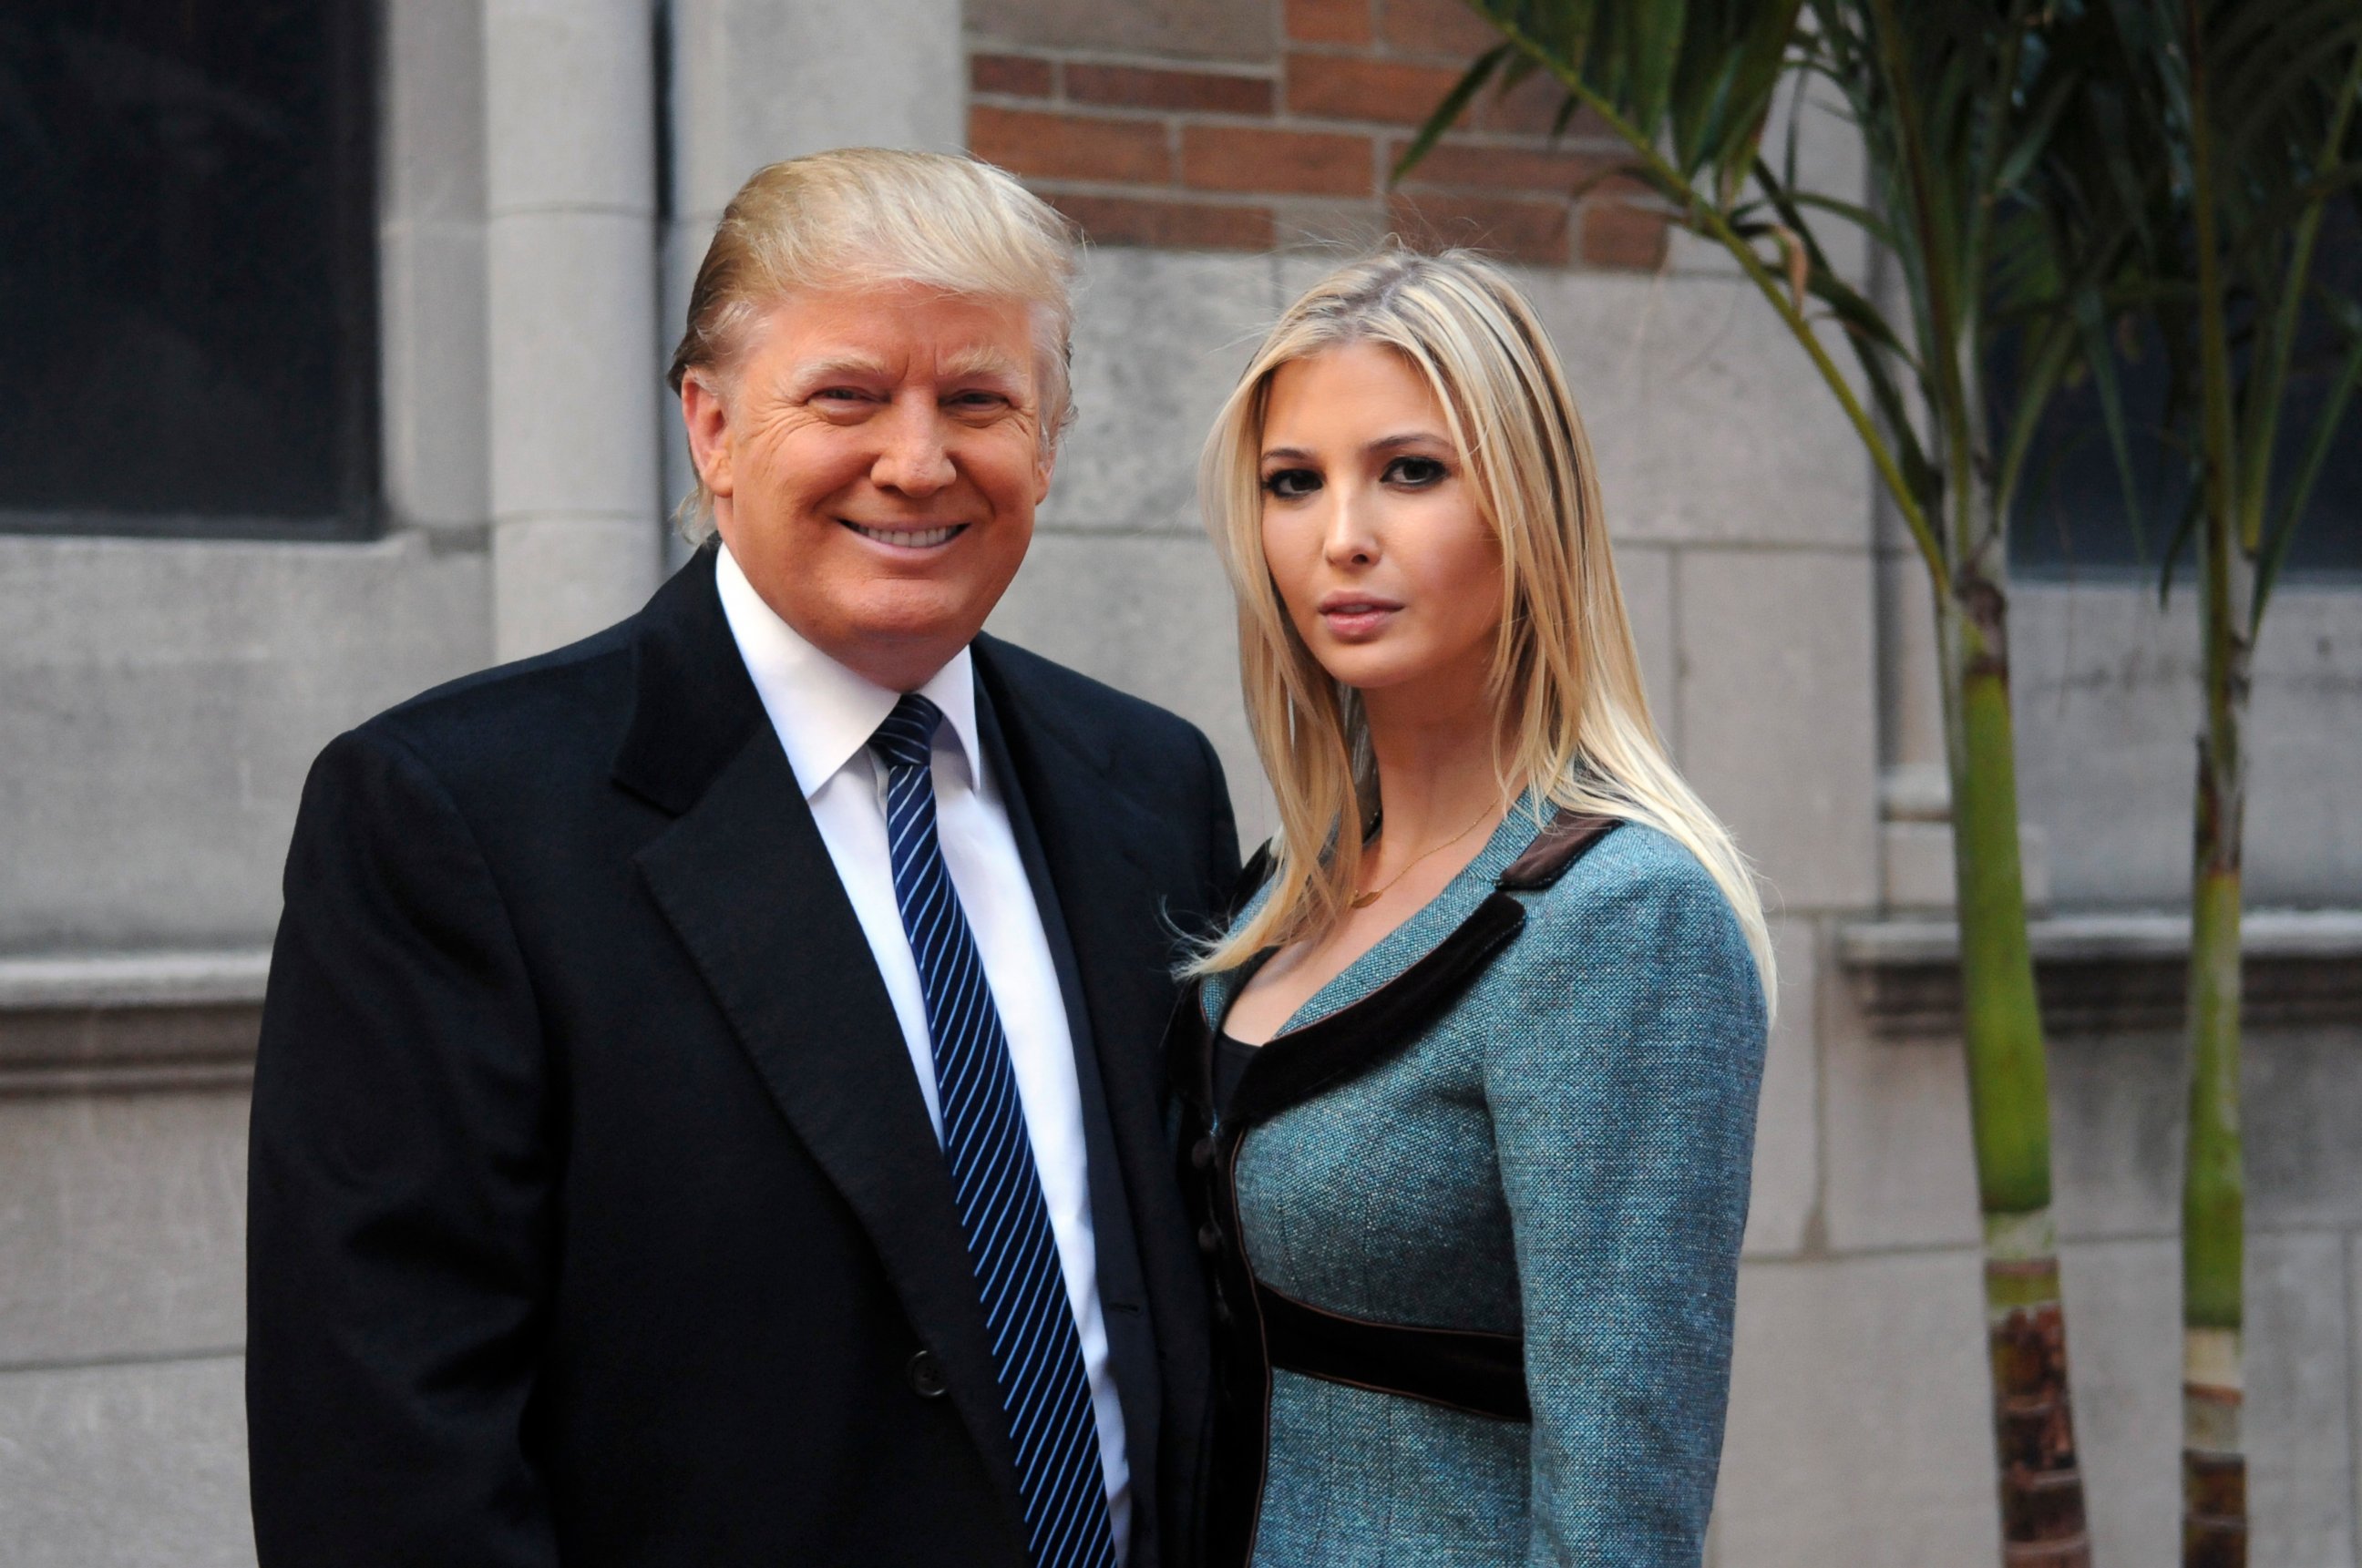 PHOTO: Donald Trump and Ivanka Trump are pictured in an episode of "The Celebrity Apprentice."